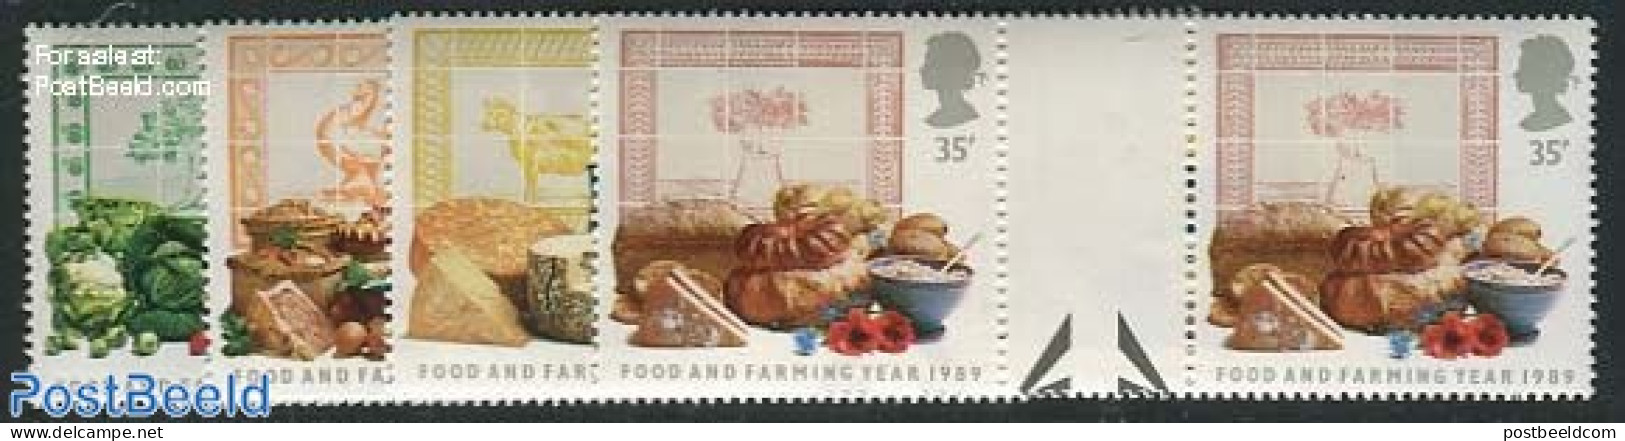 Great Britain 1989 Food And Farming Year 4v, Gutter Pairs, Mint NH, Health - Bread & Baking - Food & Drink - Ungebraucht